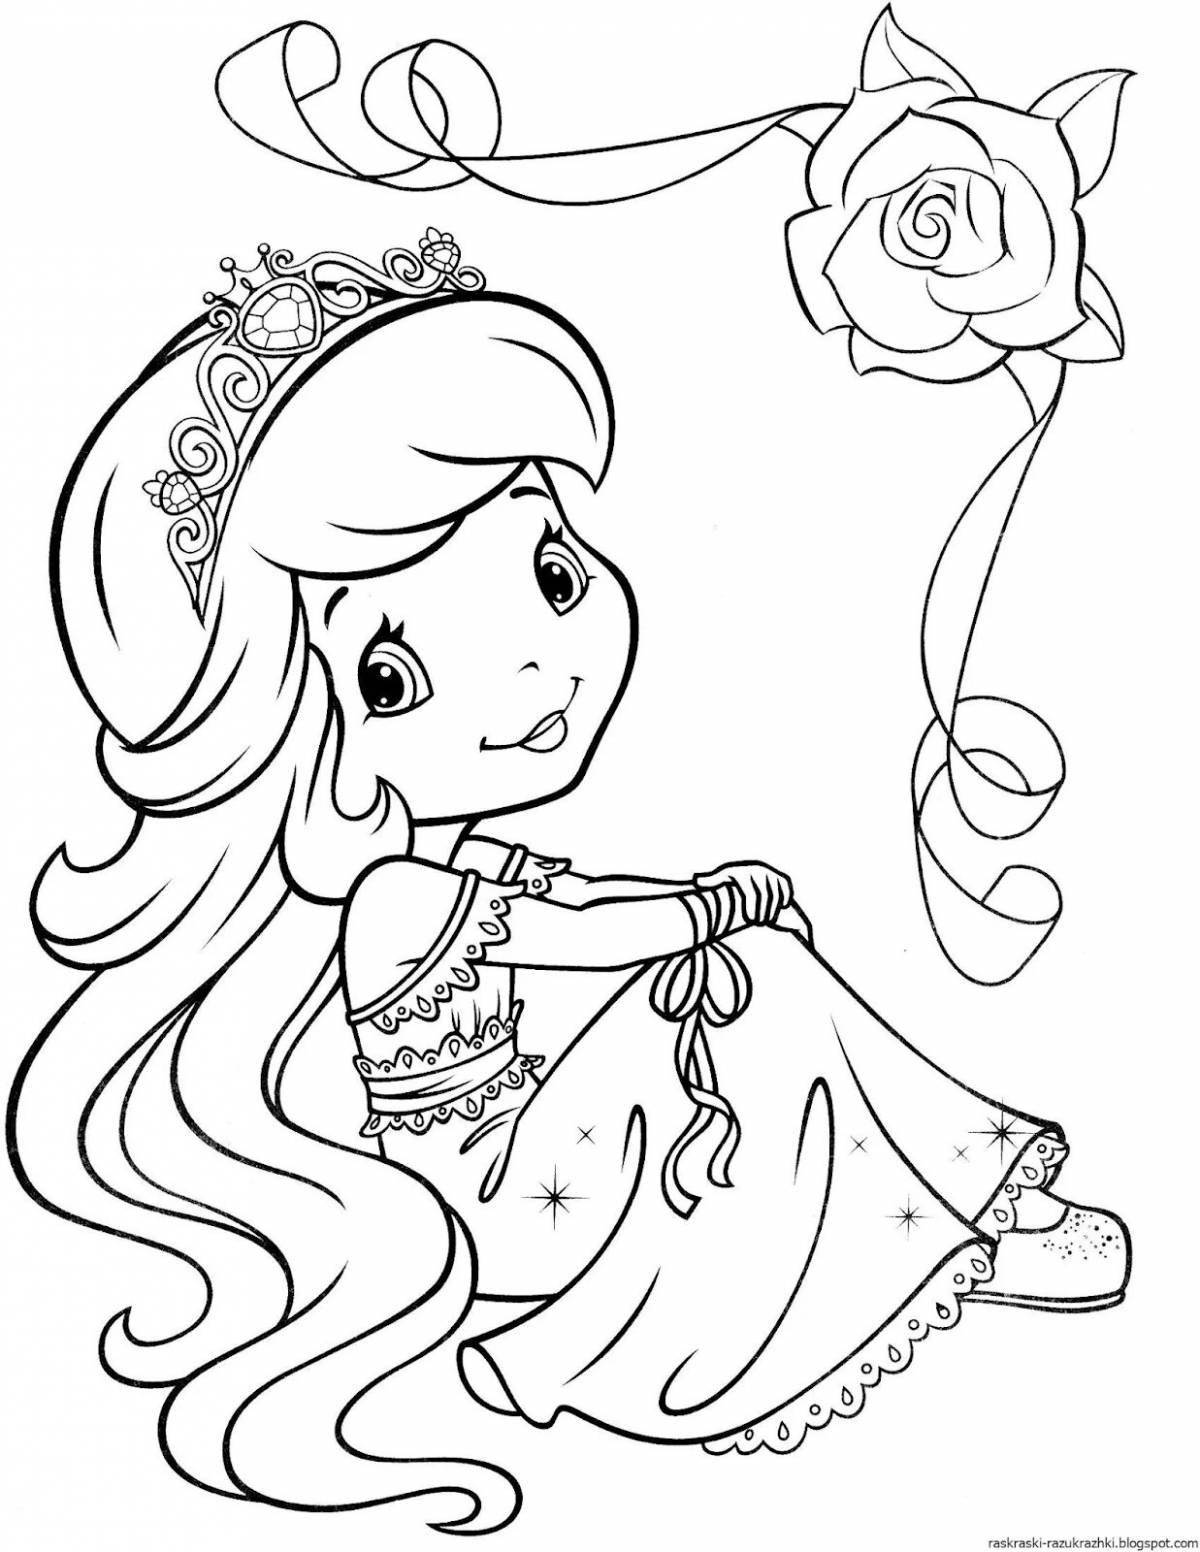 Dreamy princess coloring pages for girls 6 years old